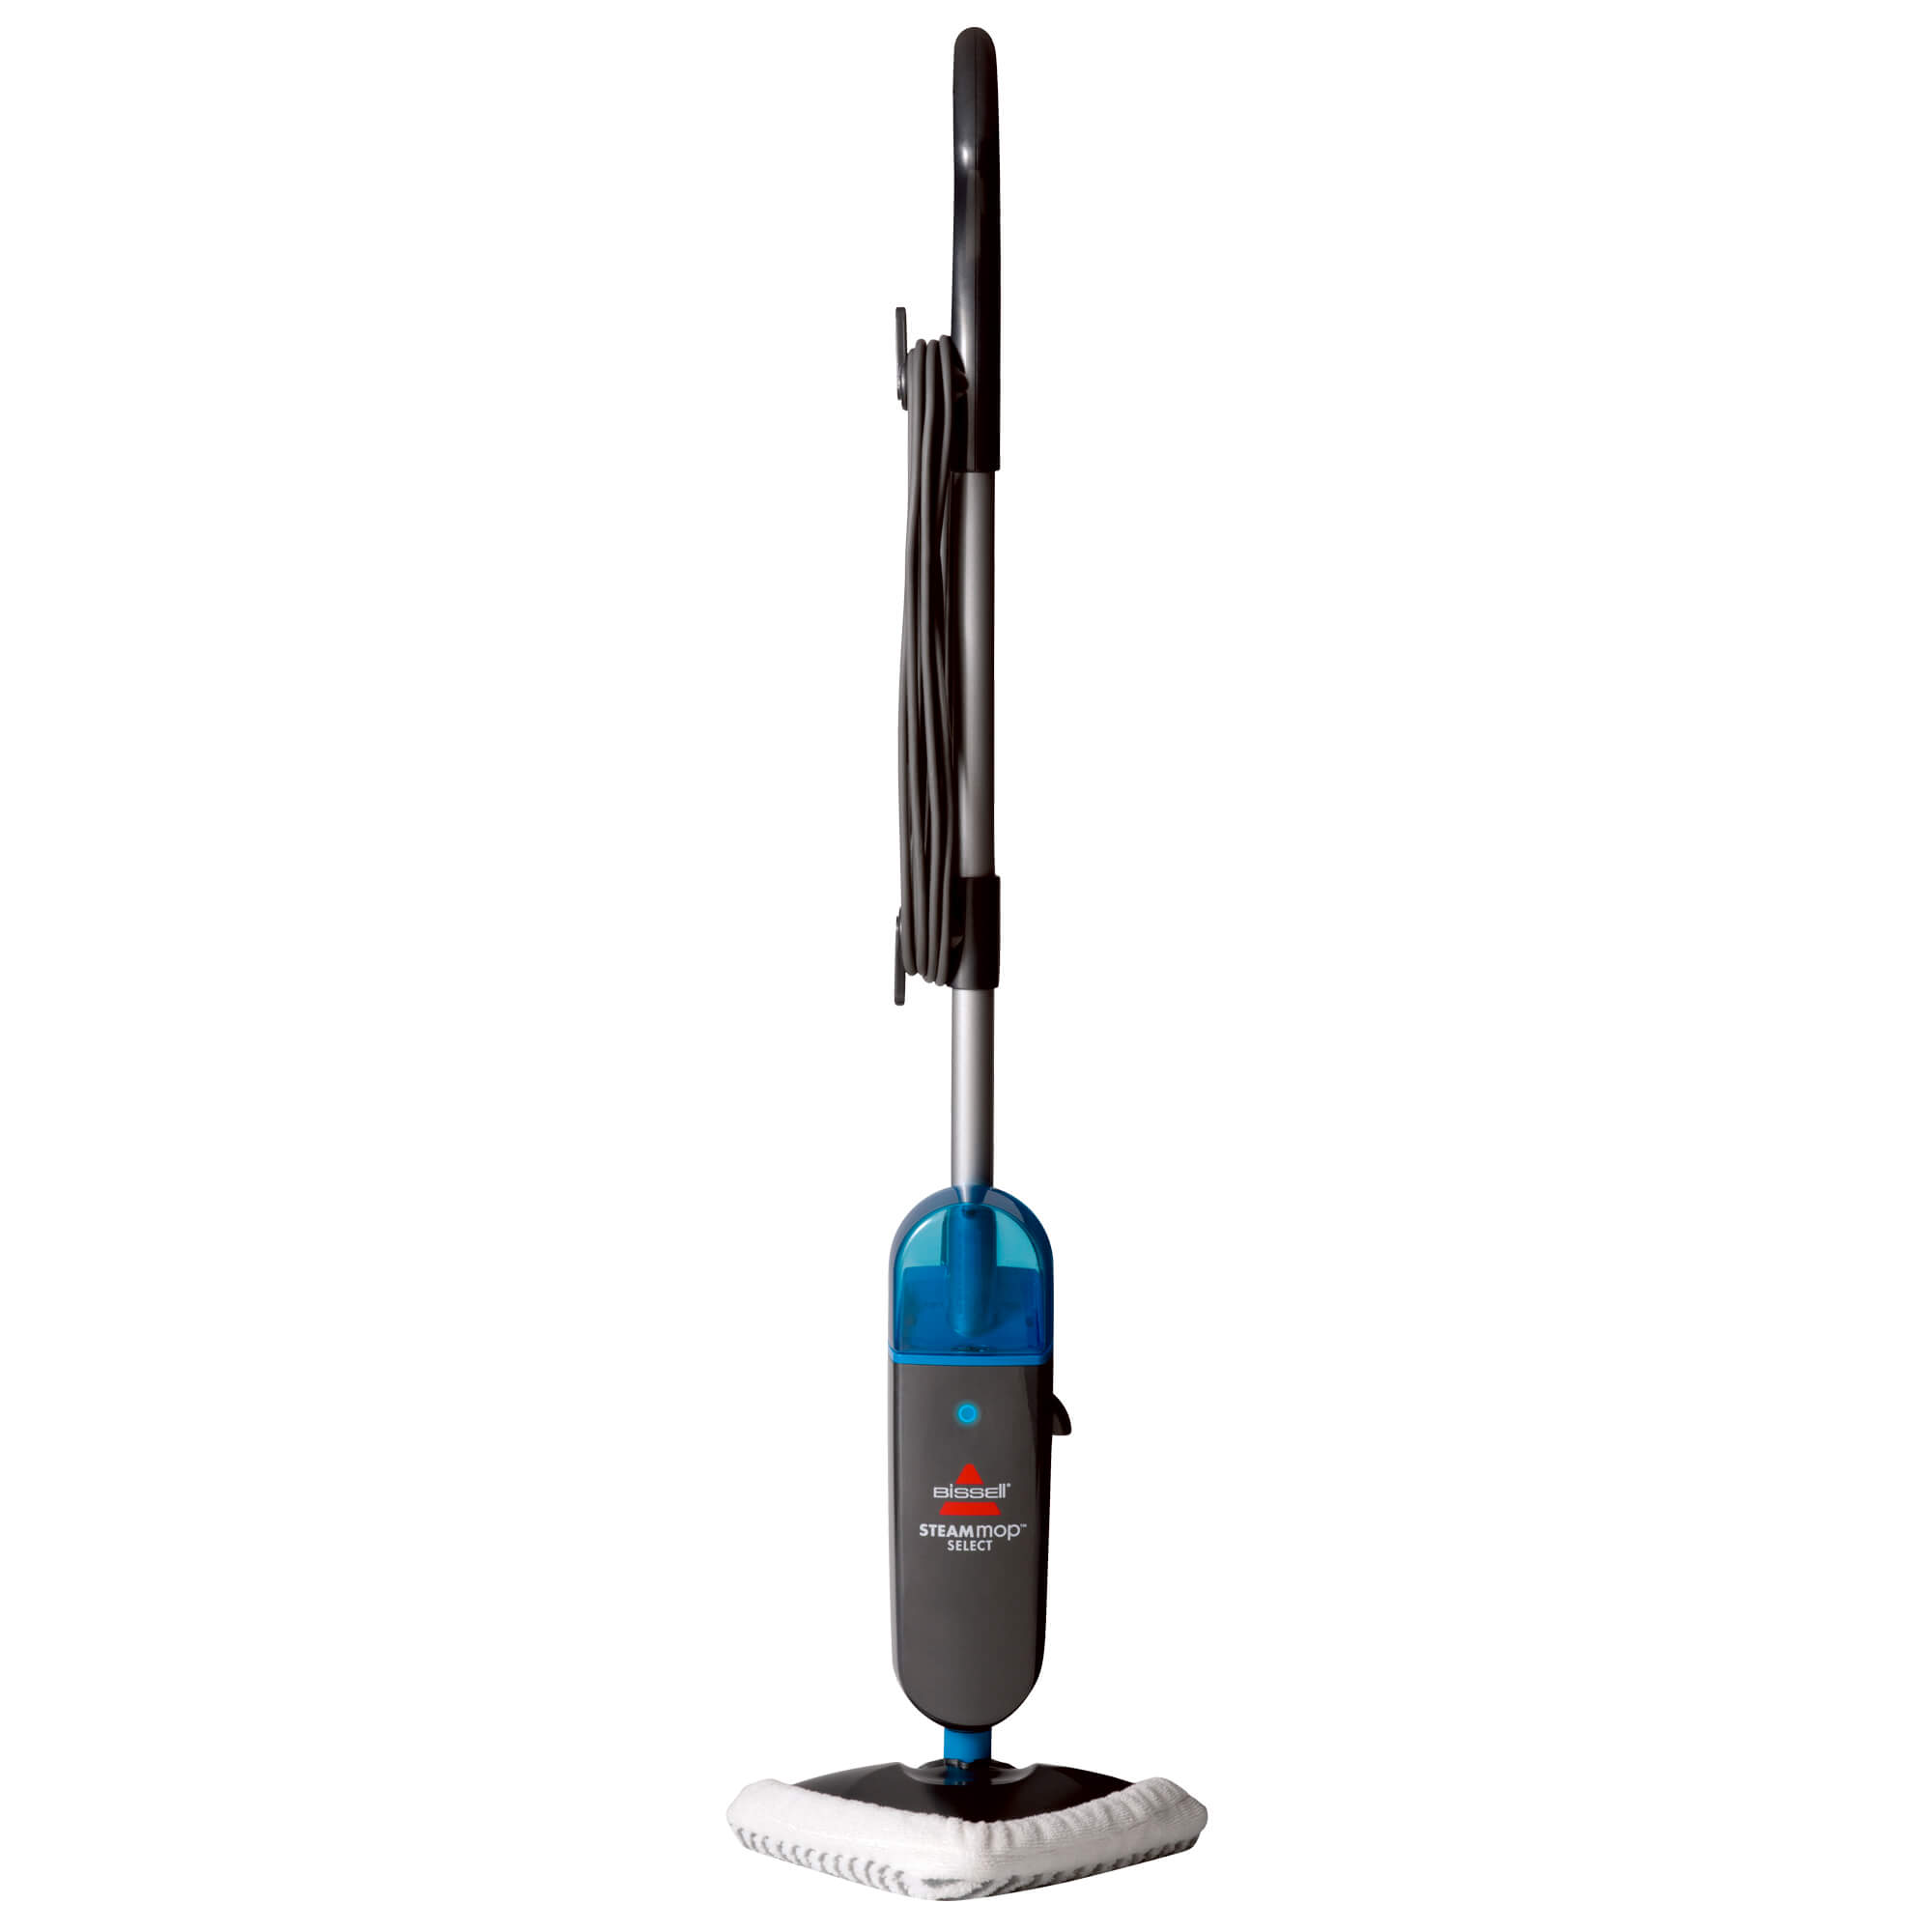 https://www.bissell.com/on/demandware.static/-/Sites-master-catalog-bissell/default/dw86cbfbbf/hi-res/Product-Images/94E9T/_94E9T_Steam_Mop_Select_Upright_A+_Content_Secondary01.jpg